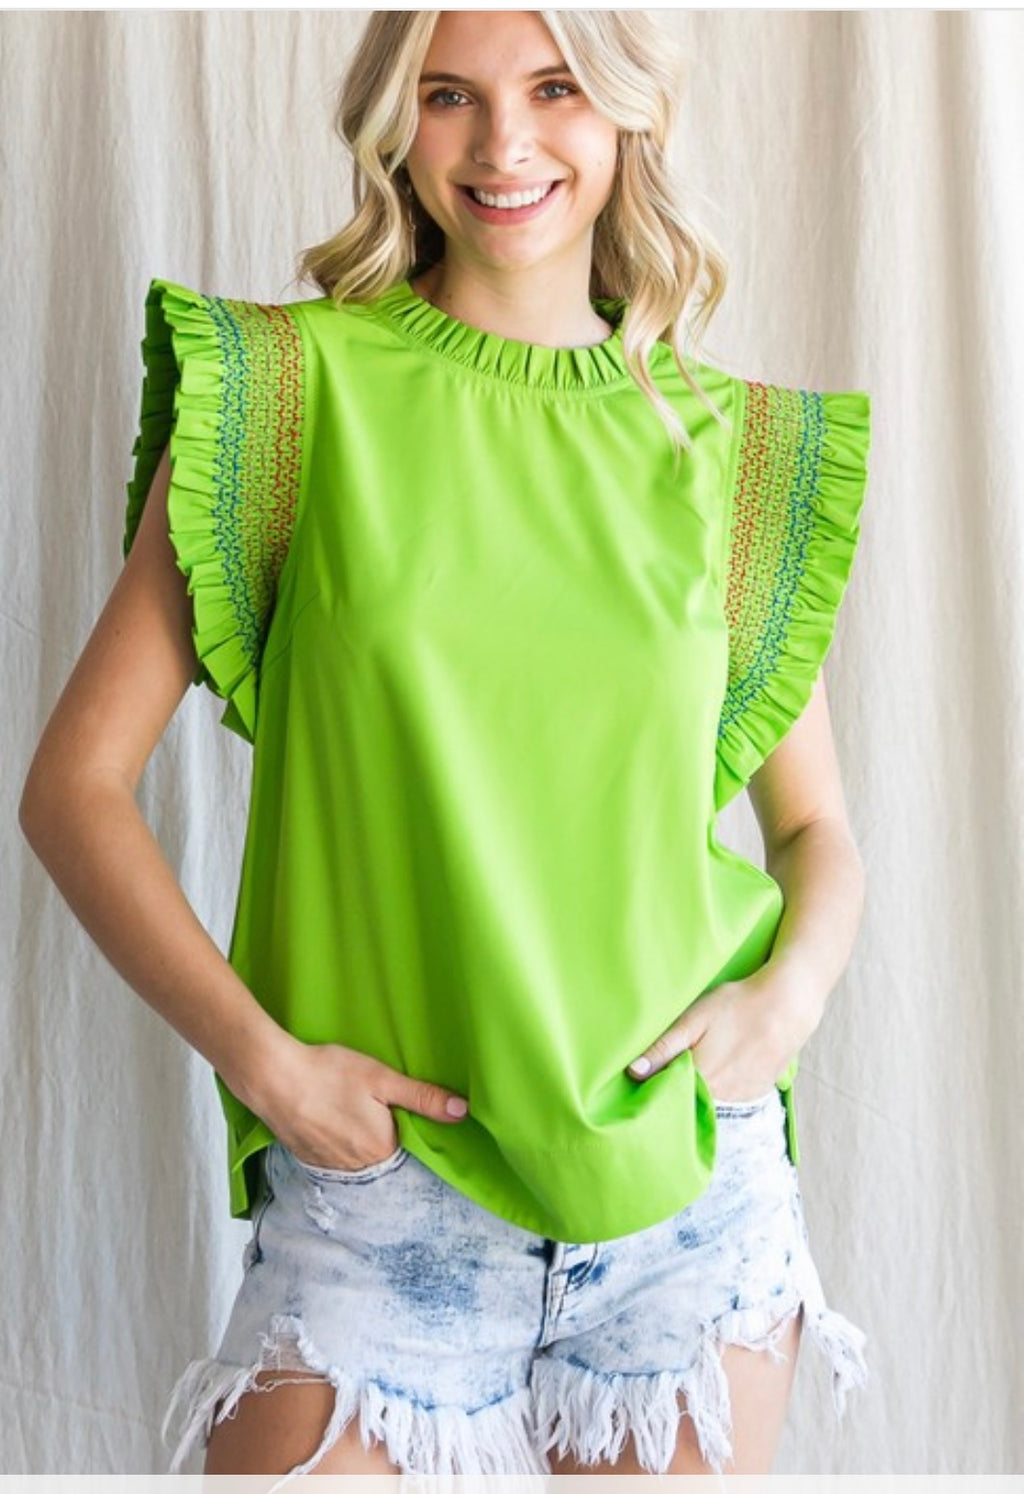 Lime, green top with multicolored stitching